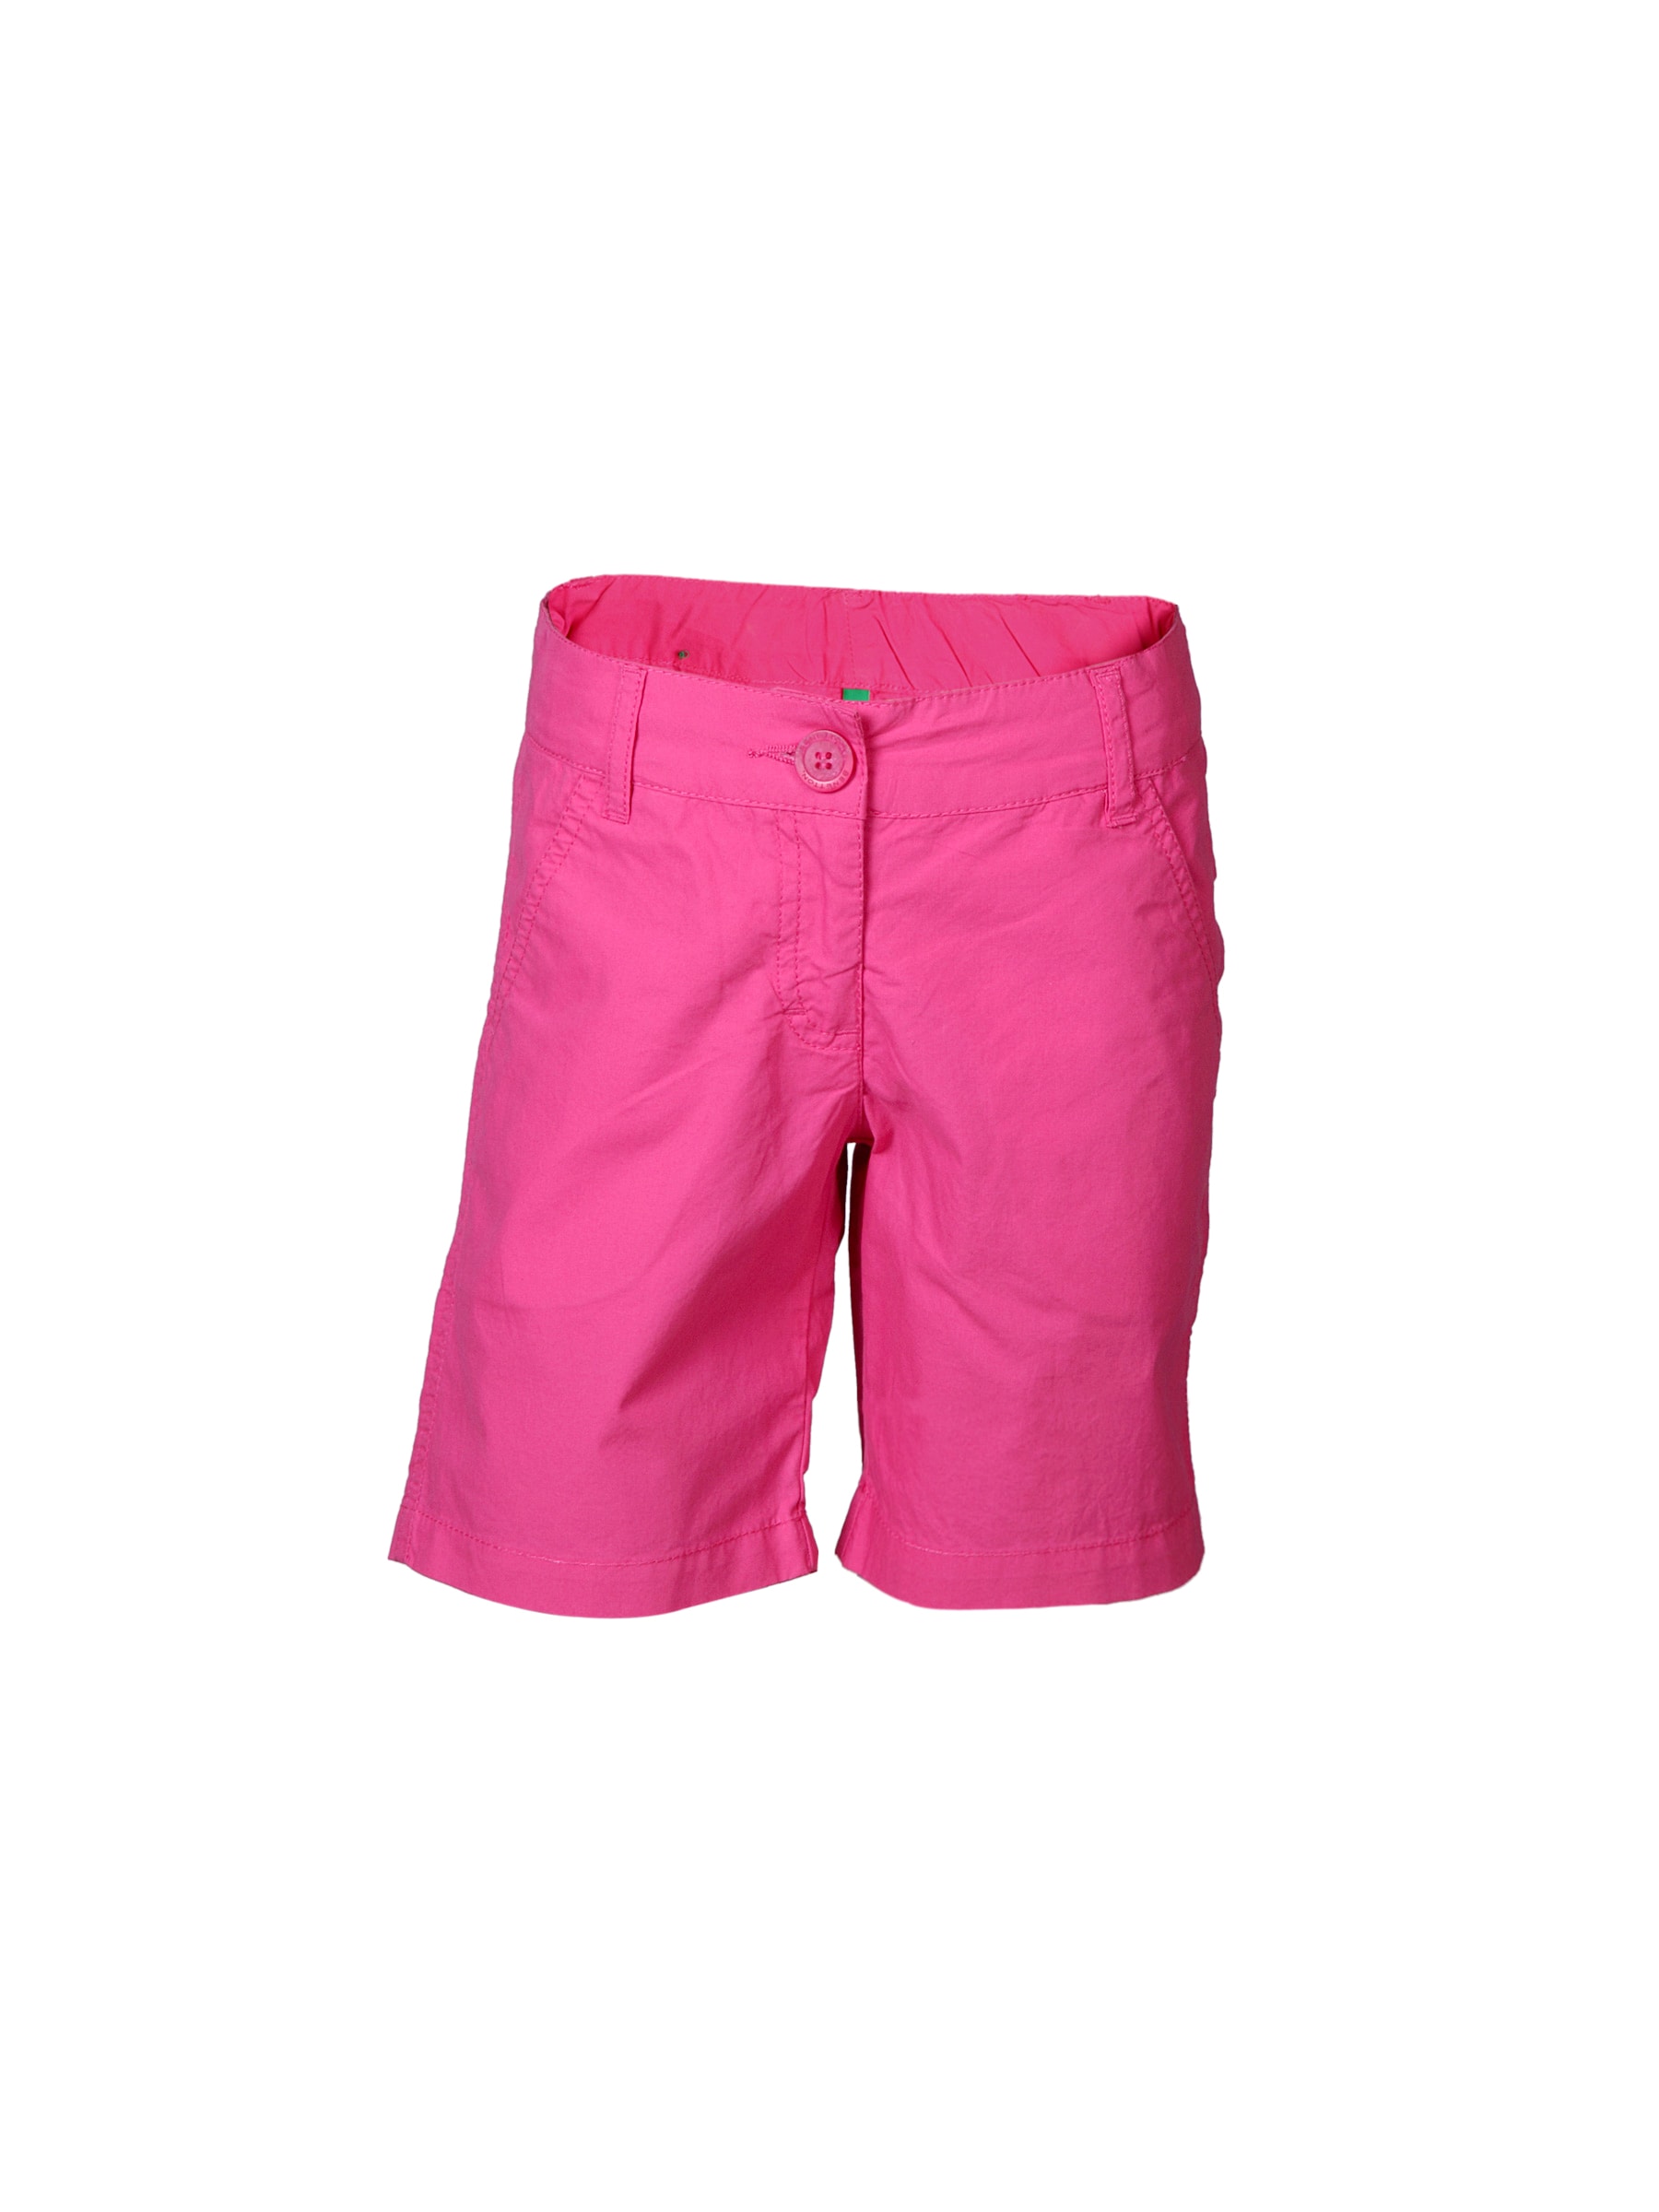 United Colors of Benetton Kids Girls Pink Shorts